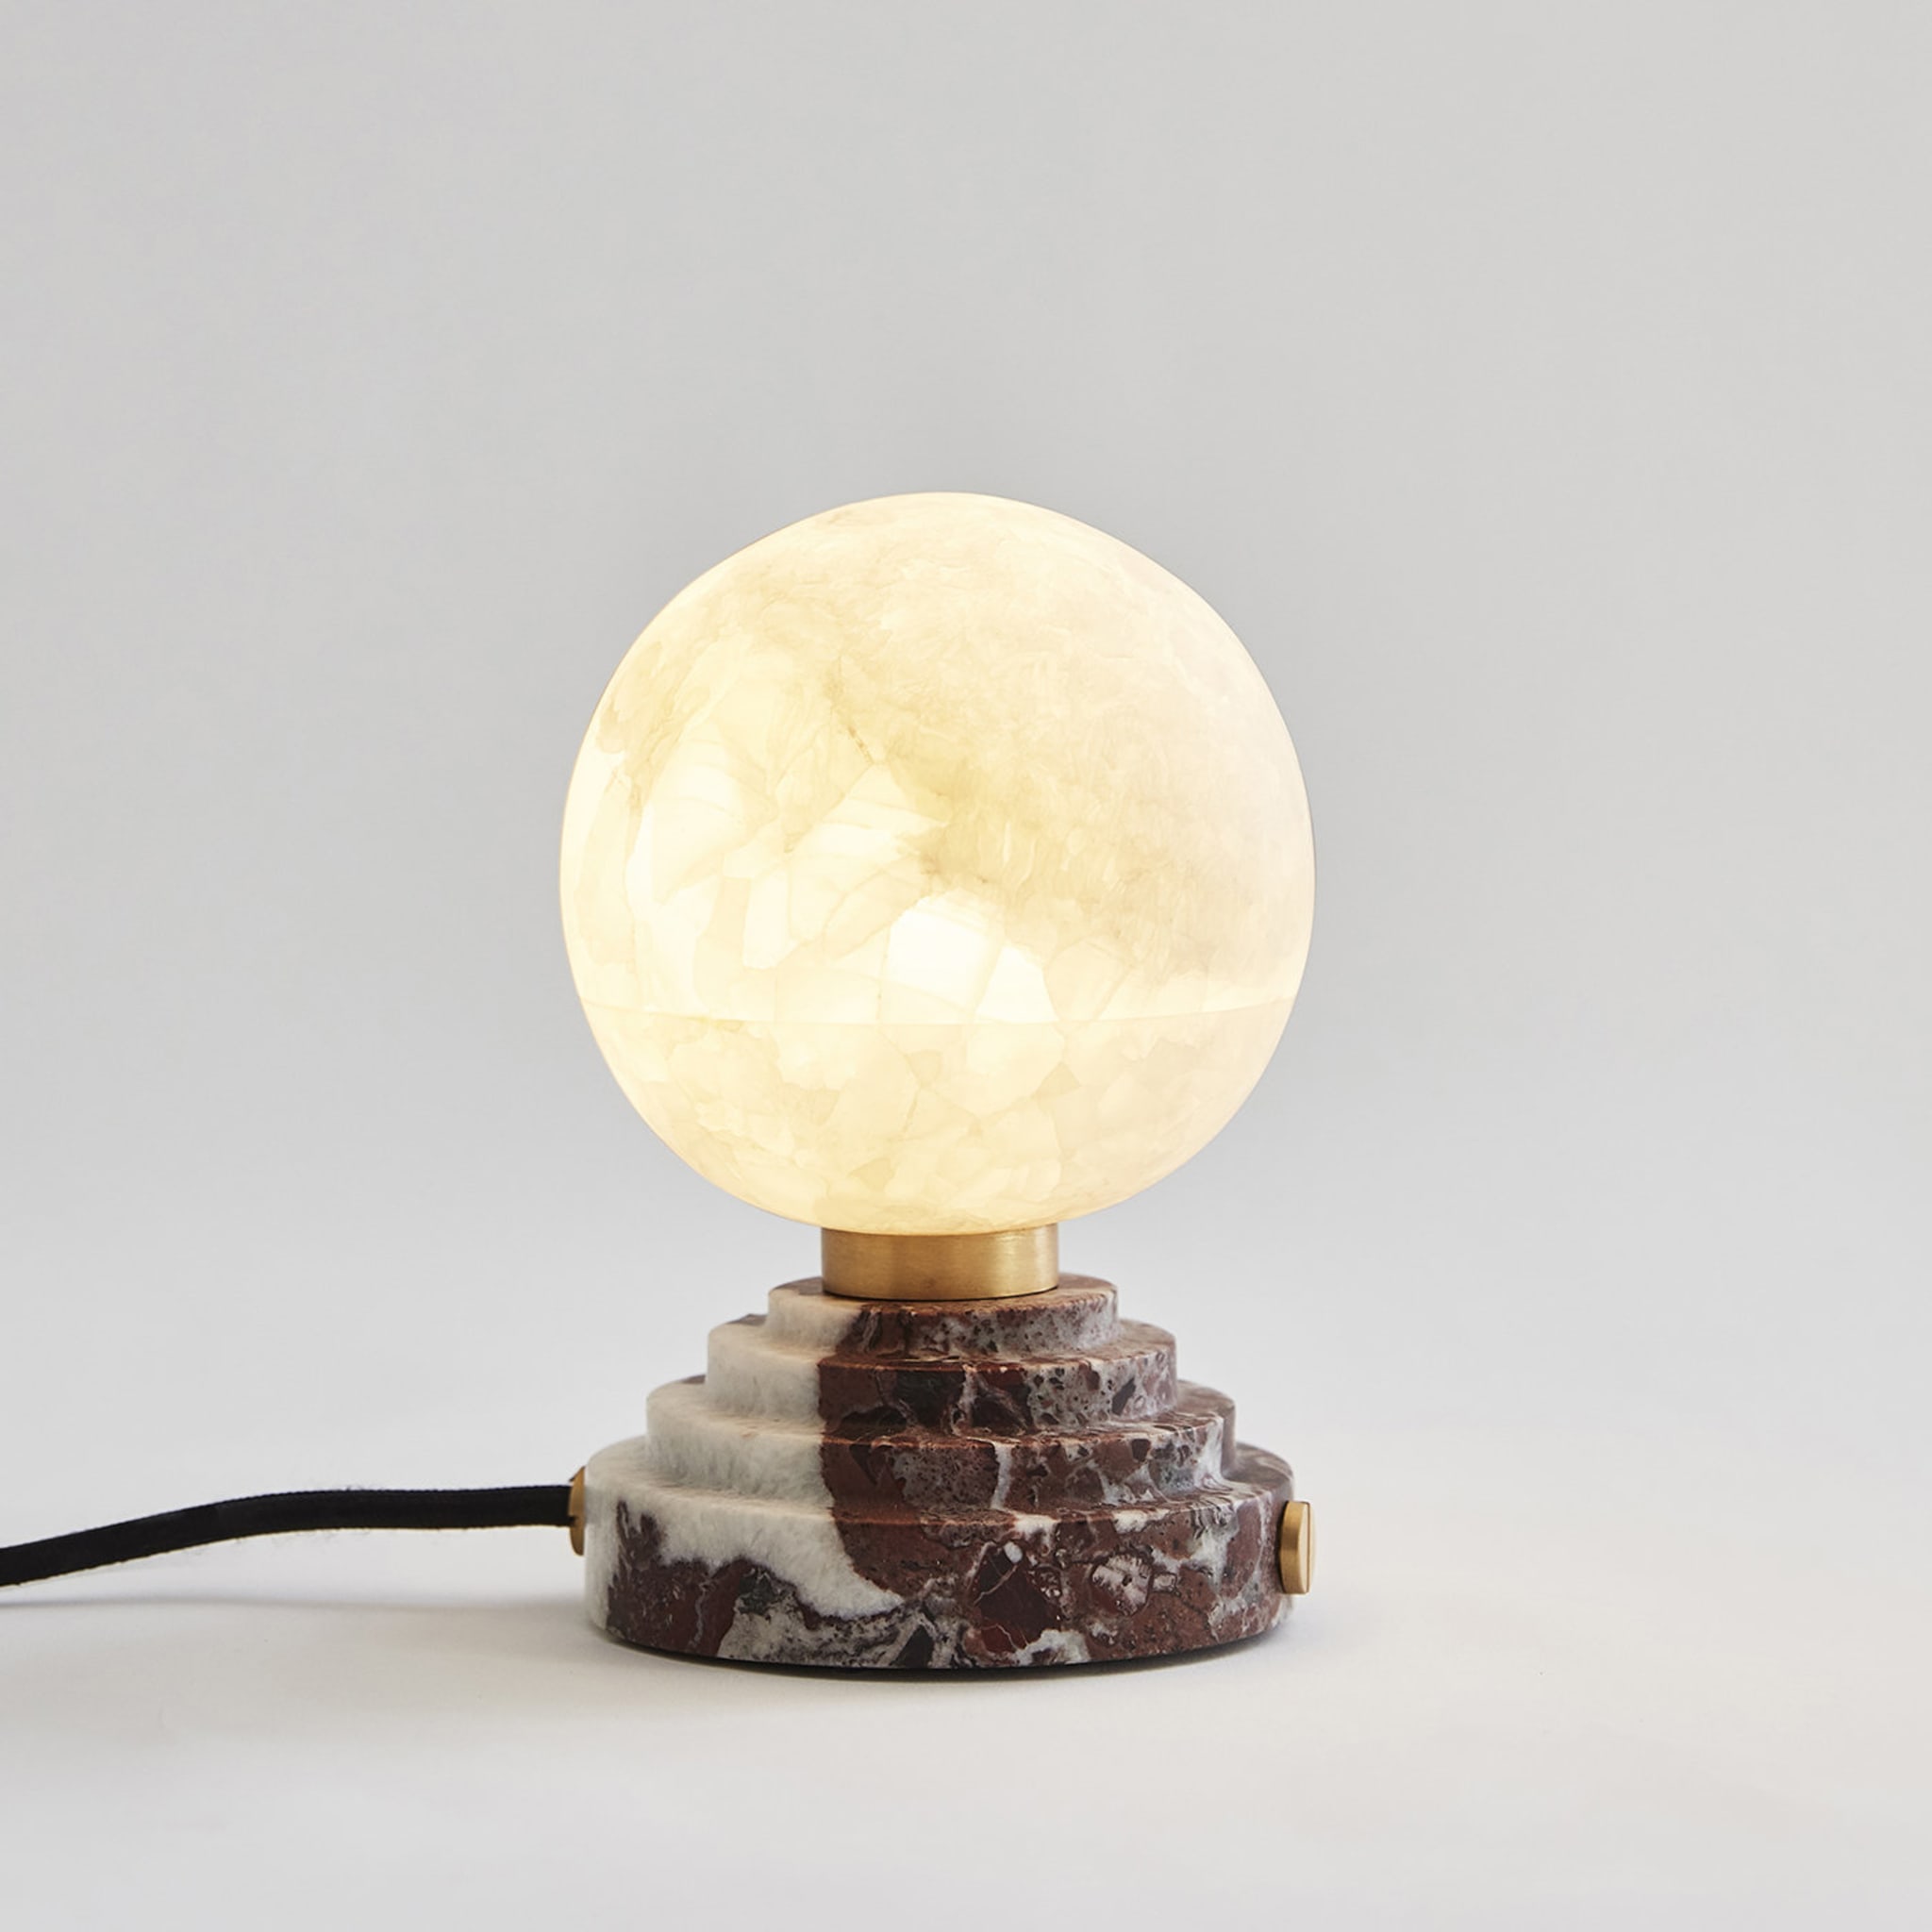 Lunar Table Lamp in Rosso Levanto Marble and Onyx  - Alternative view 1